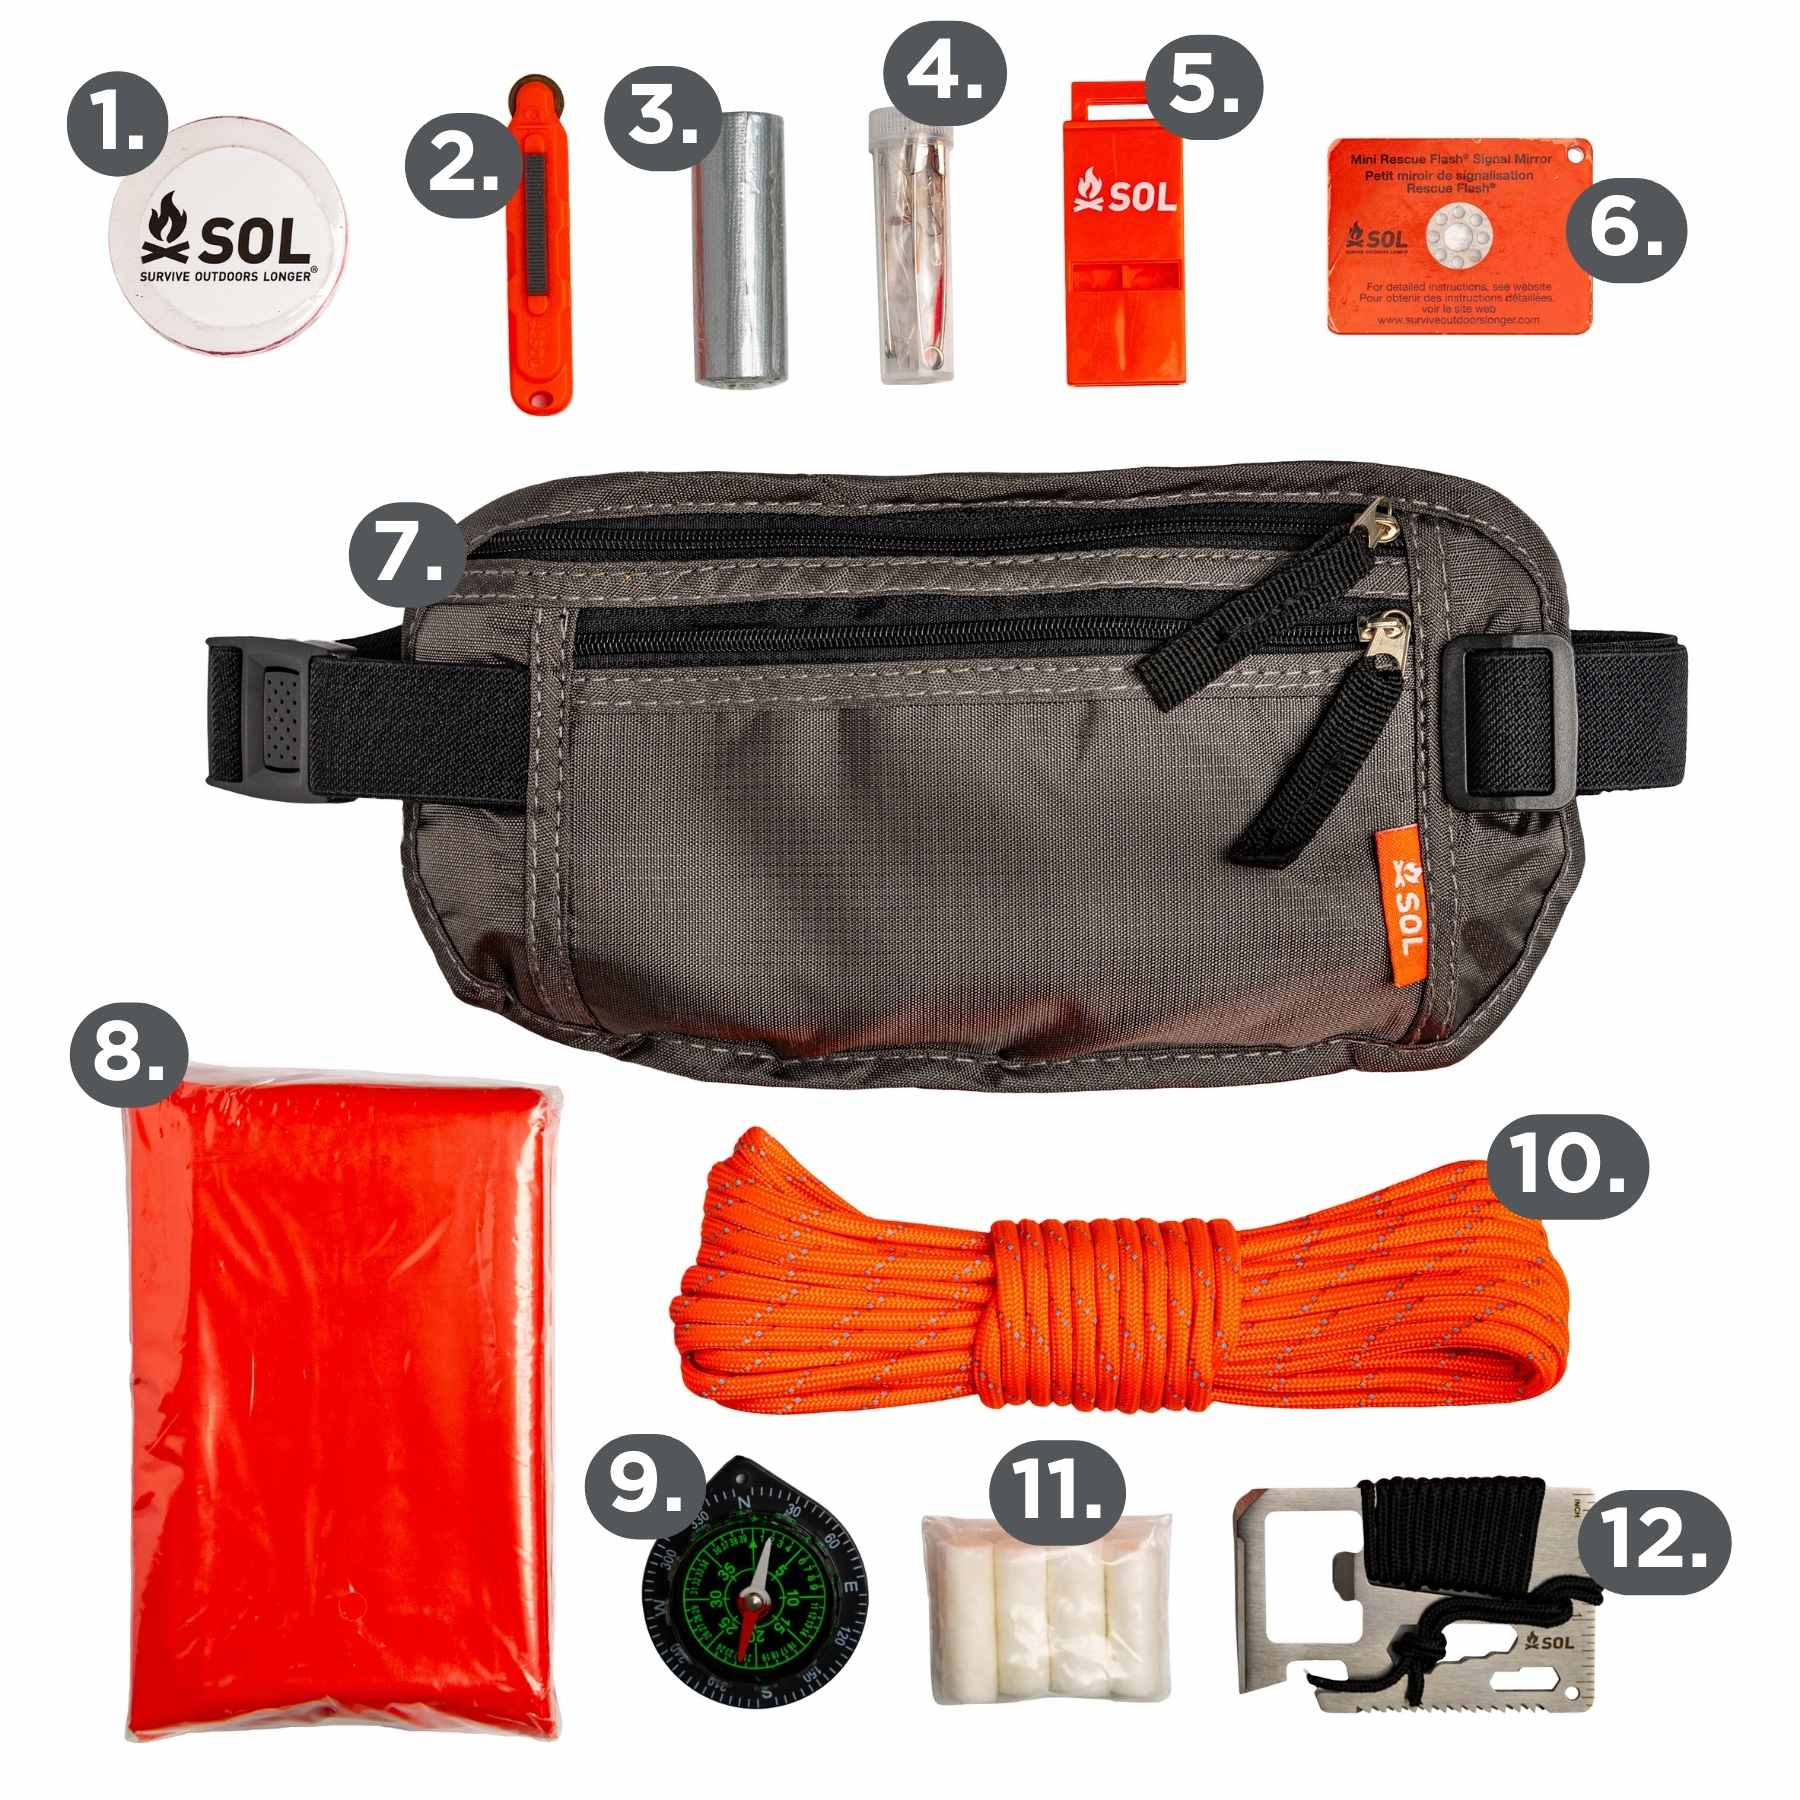 Trail Ready Kit Numbered Contents